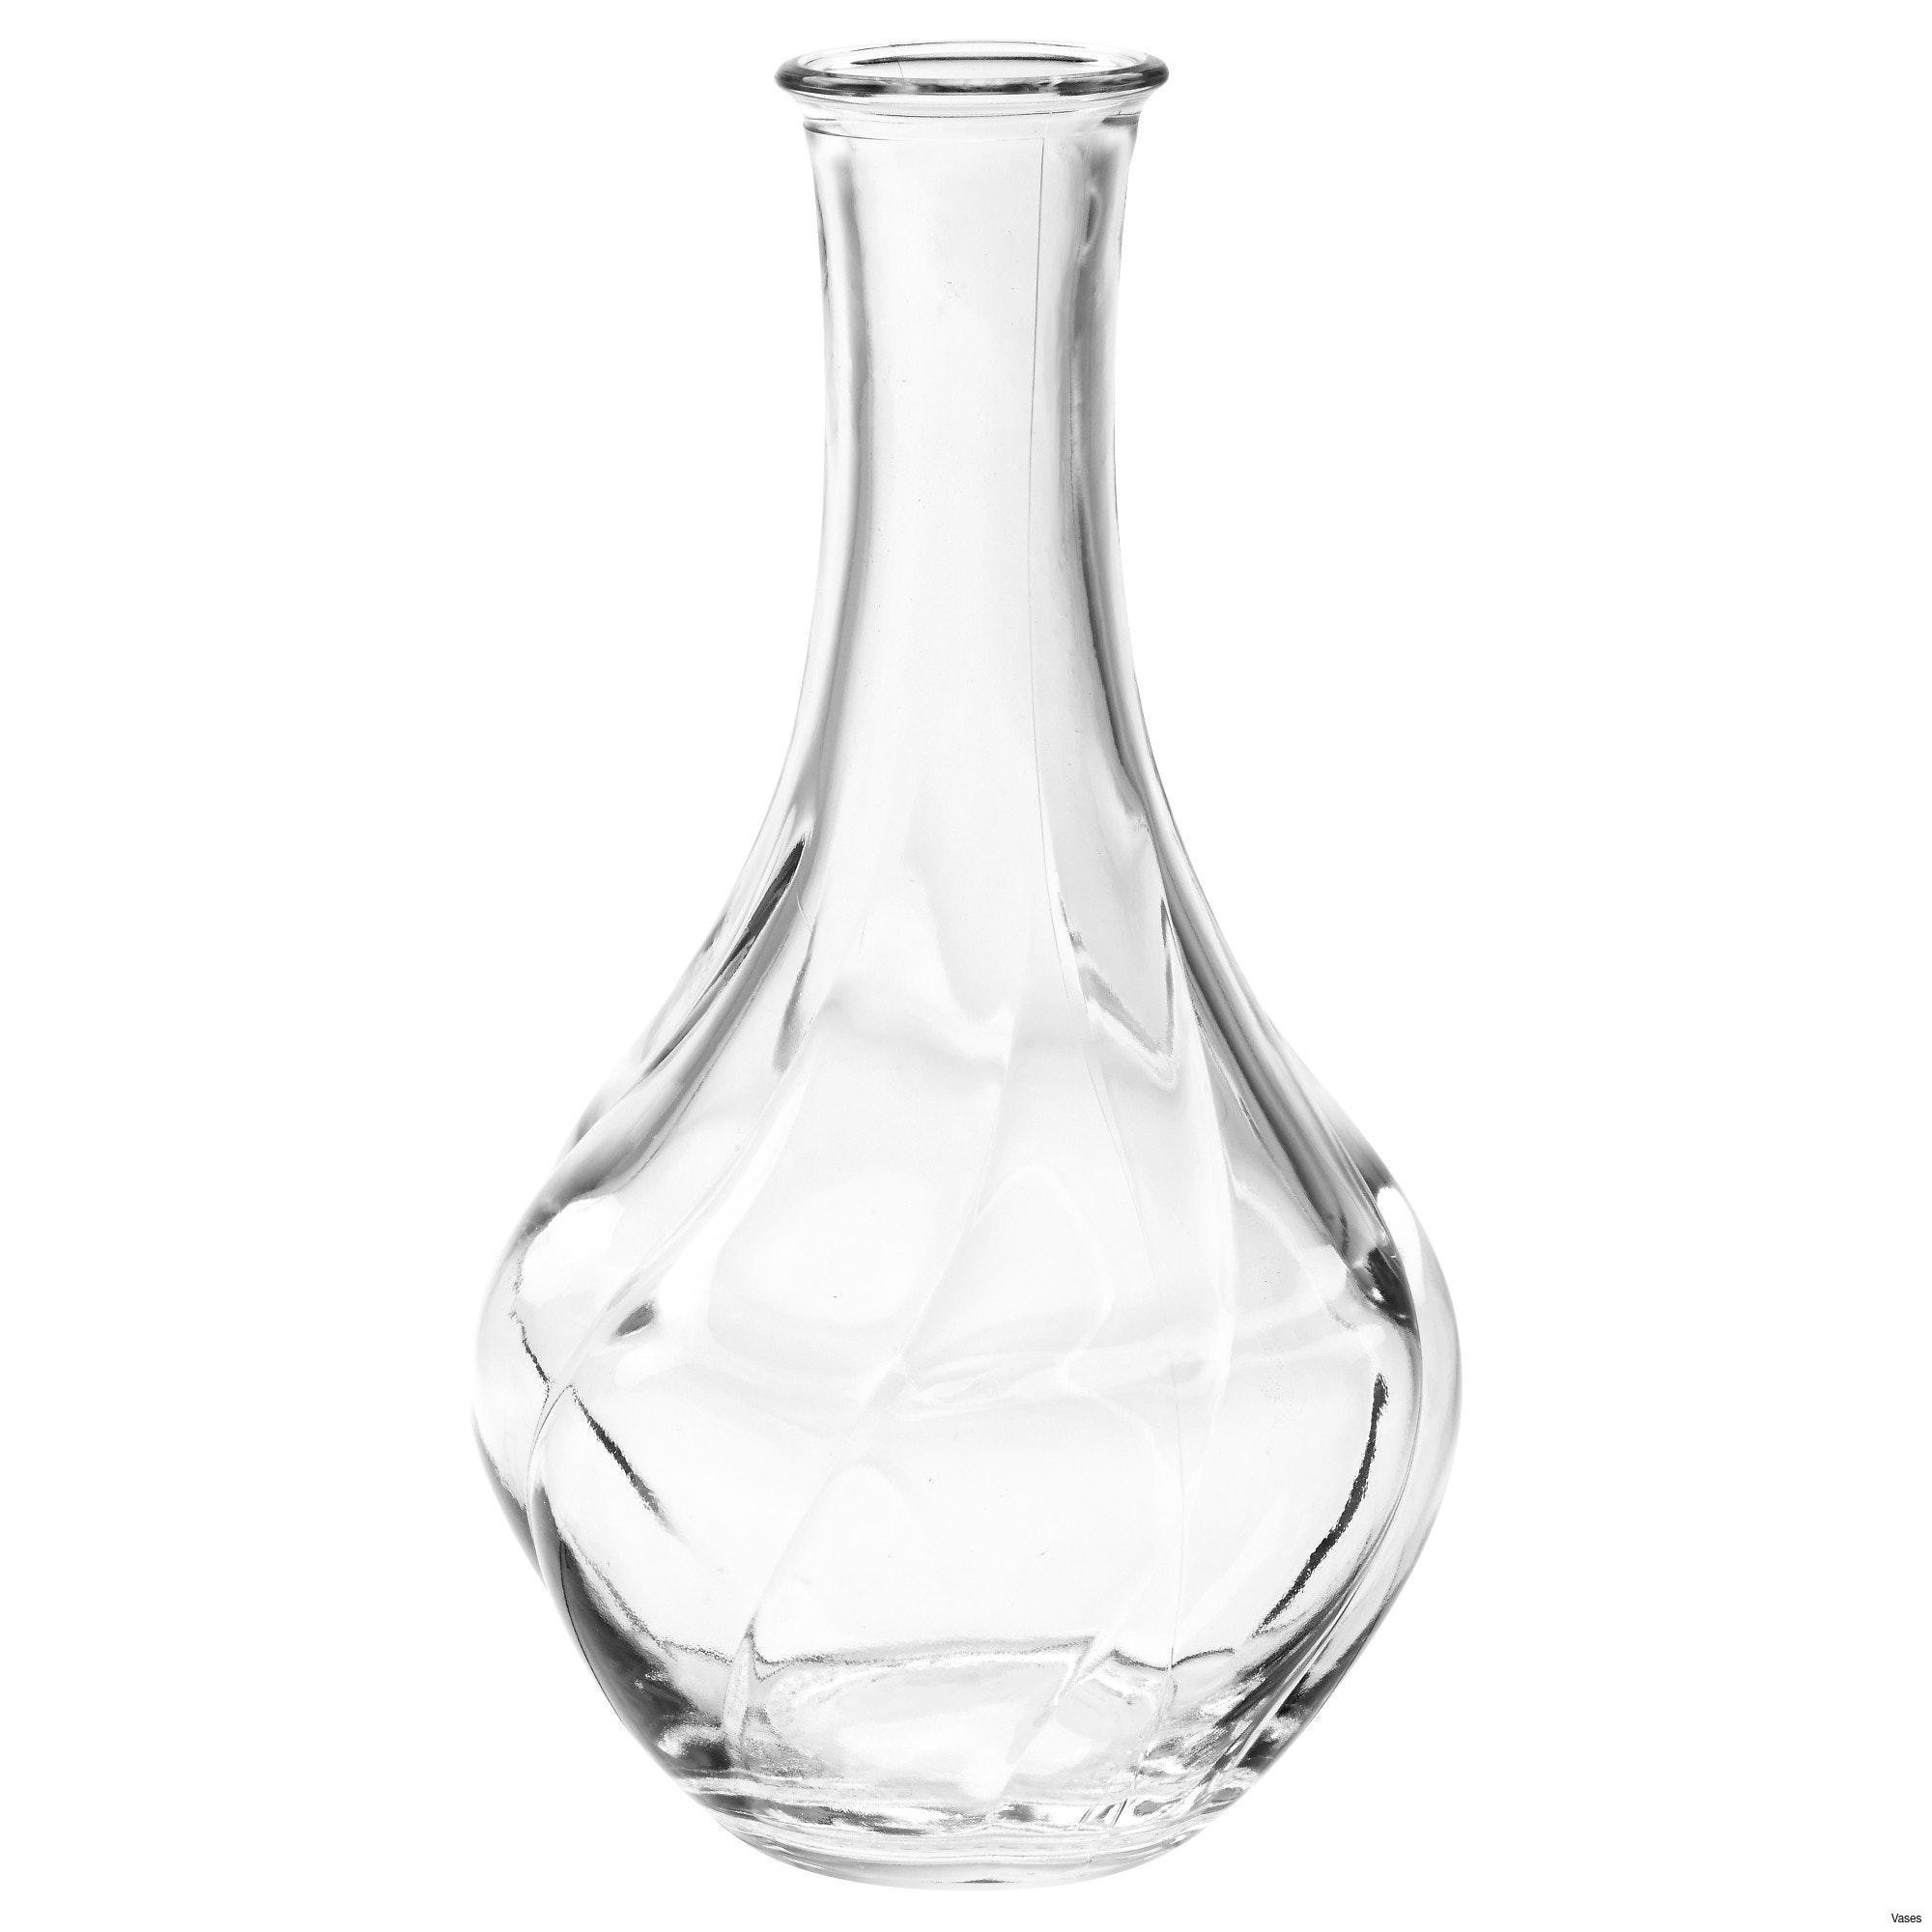 19 Best 5 Inch Square Glass Vases 2024 free download 5 inch square glass vases of large glass vases gallery living room glass vases fresh clear vase for large glass vases gallery living room glass vases fresh clear vase 0d tags amazing and of